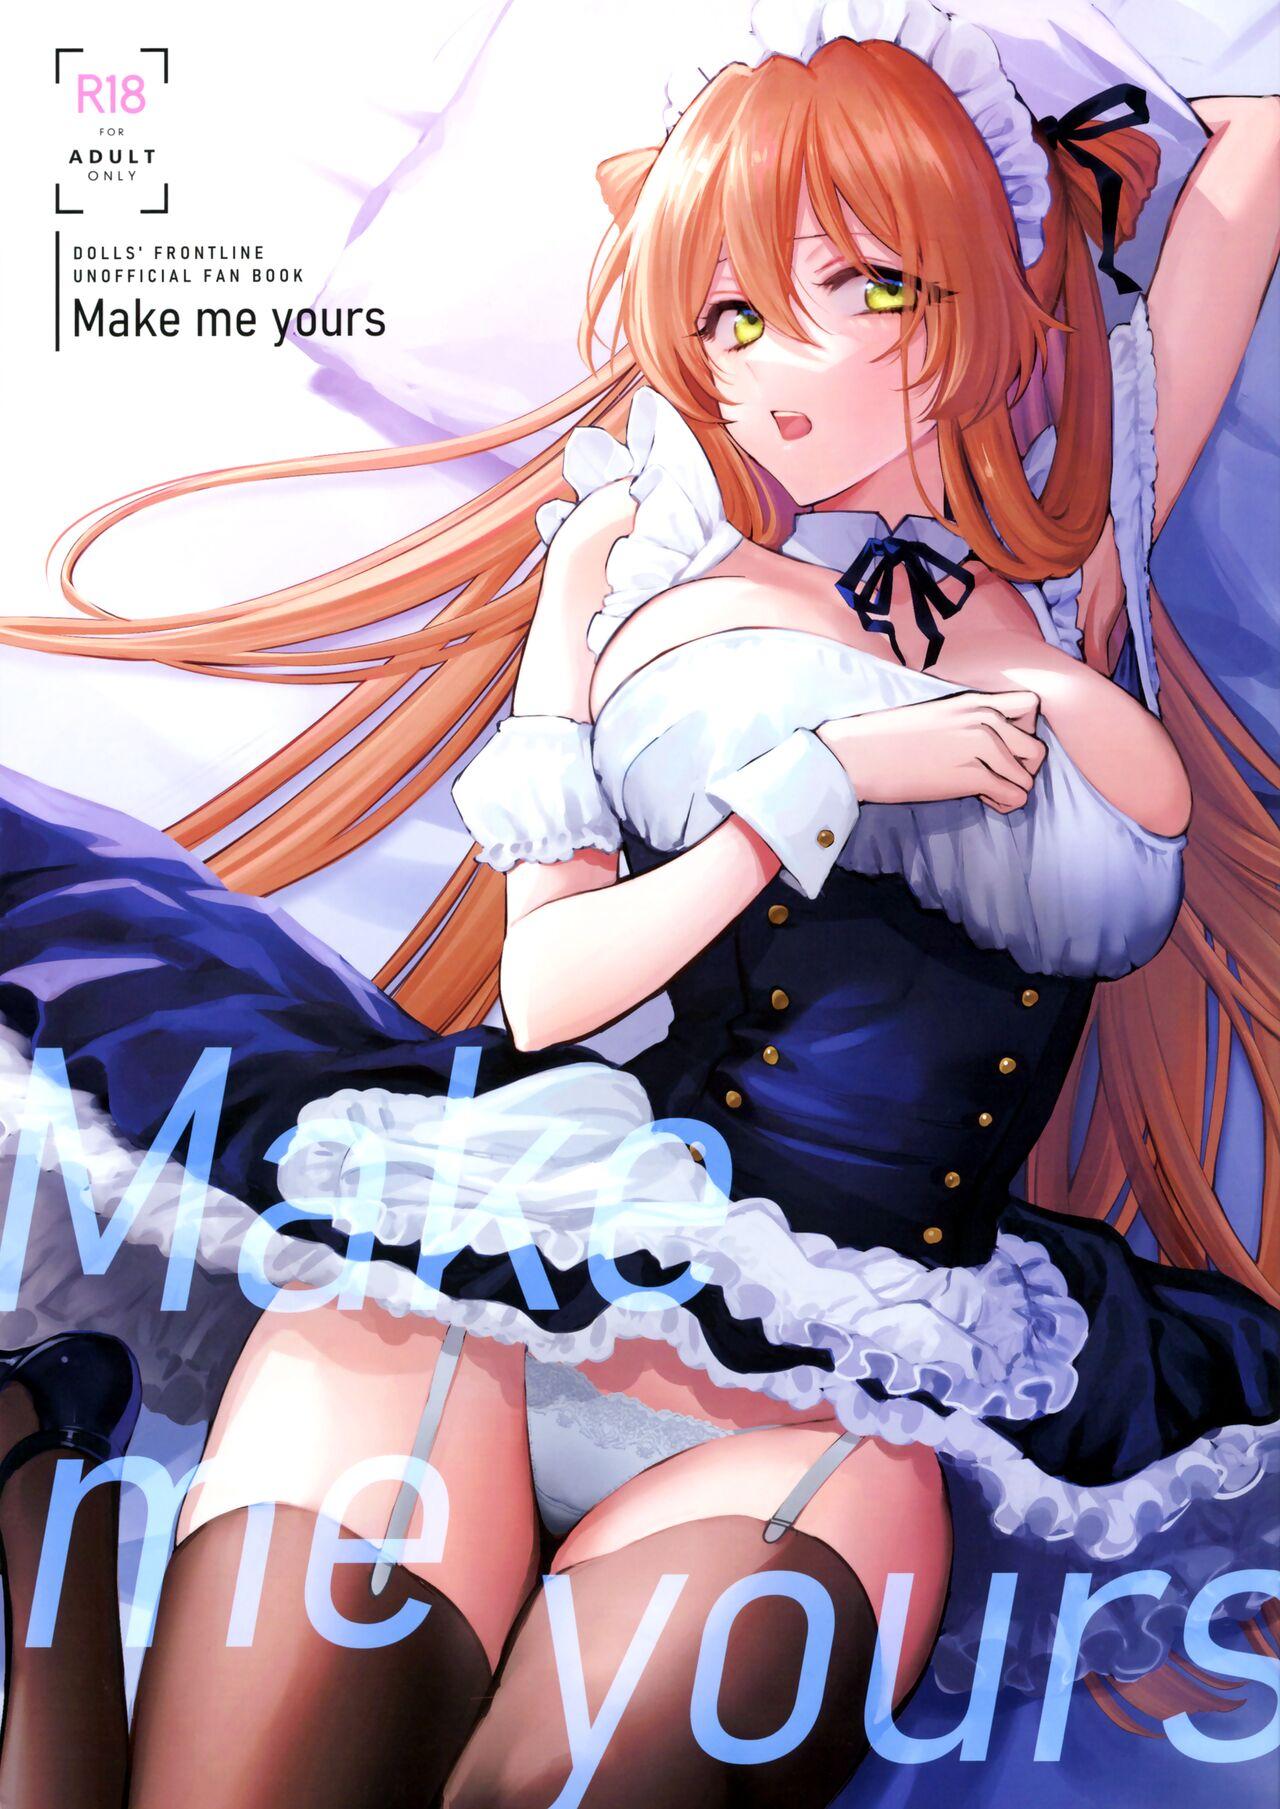 Big Butt Make me Yours - Girls frontline Teensnow - Page 1